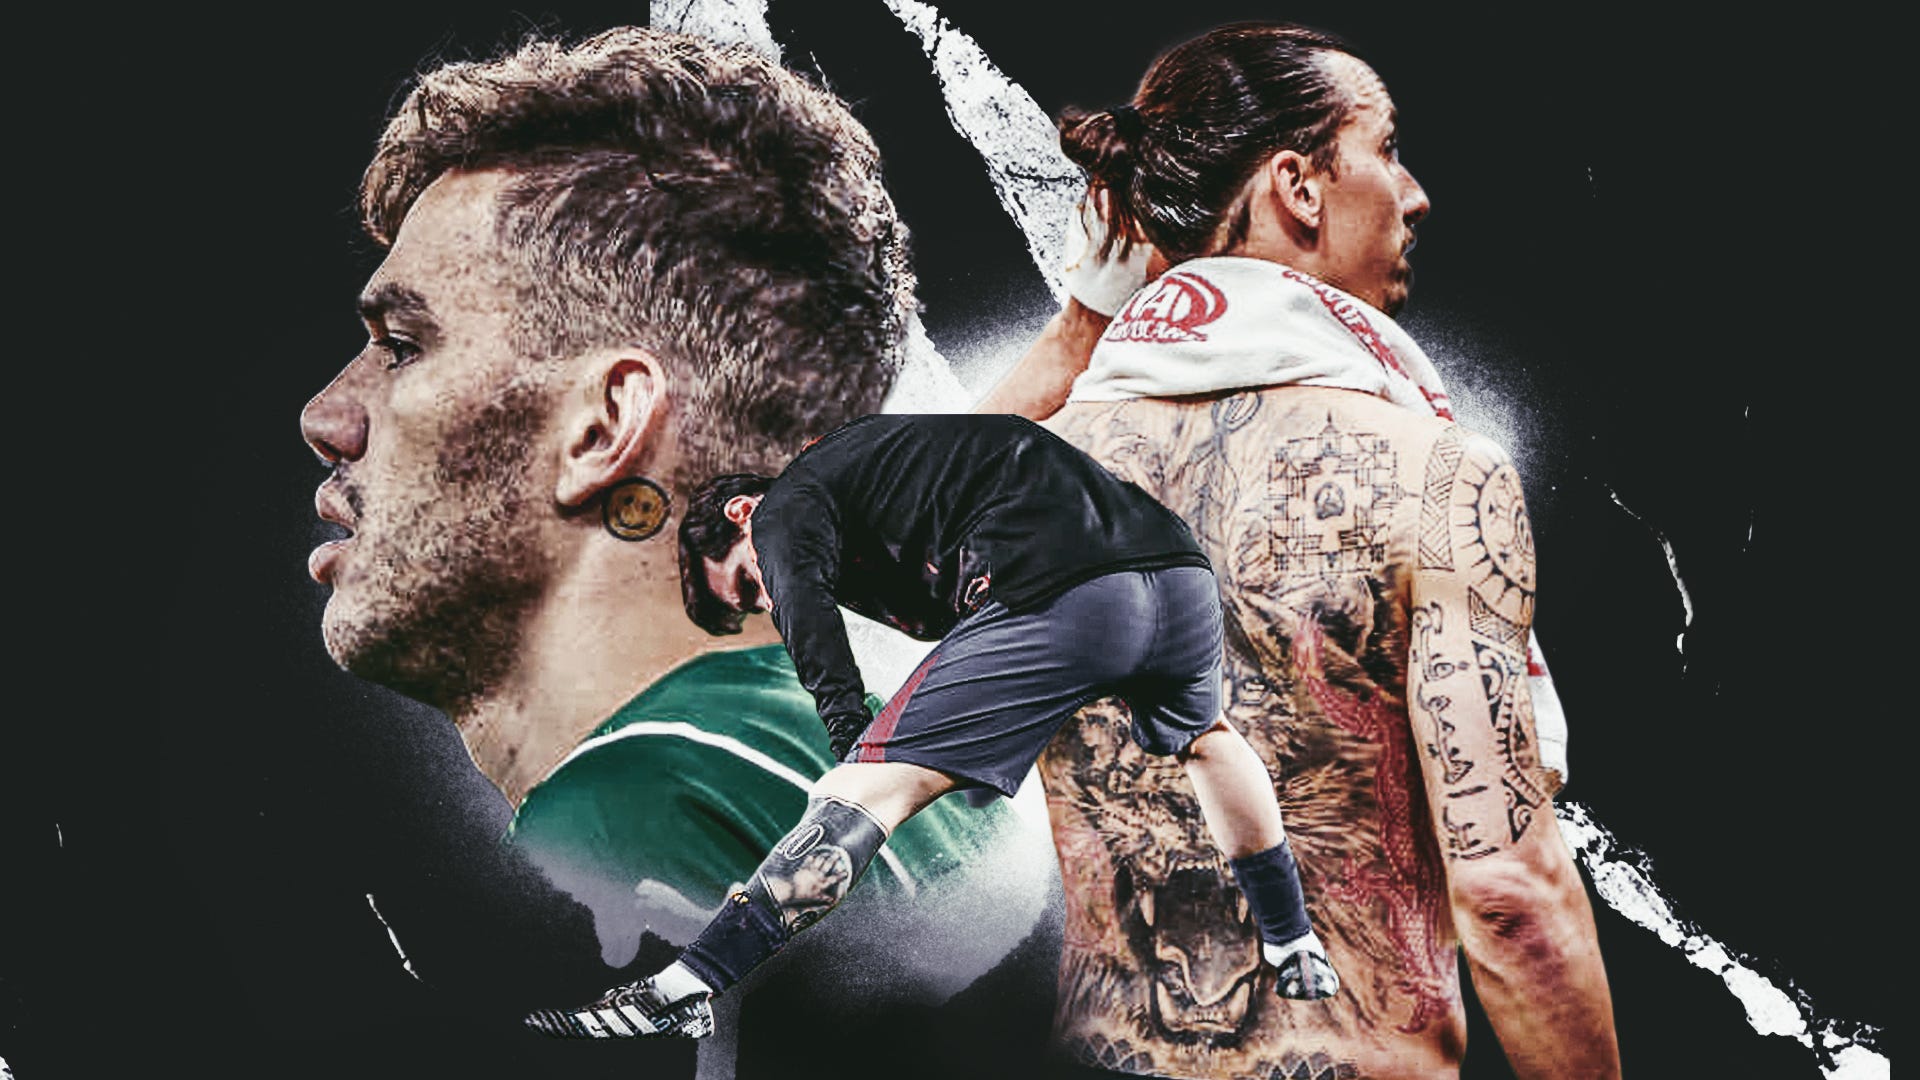 Decoding Messis Tattoo and hidden meaning post FIFA 2022 win